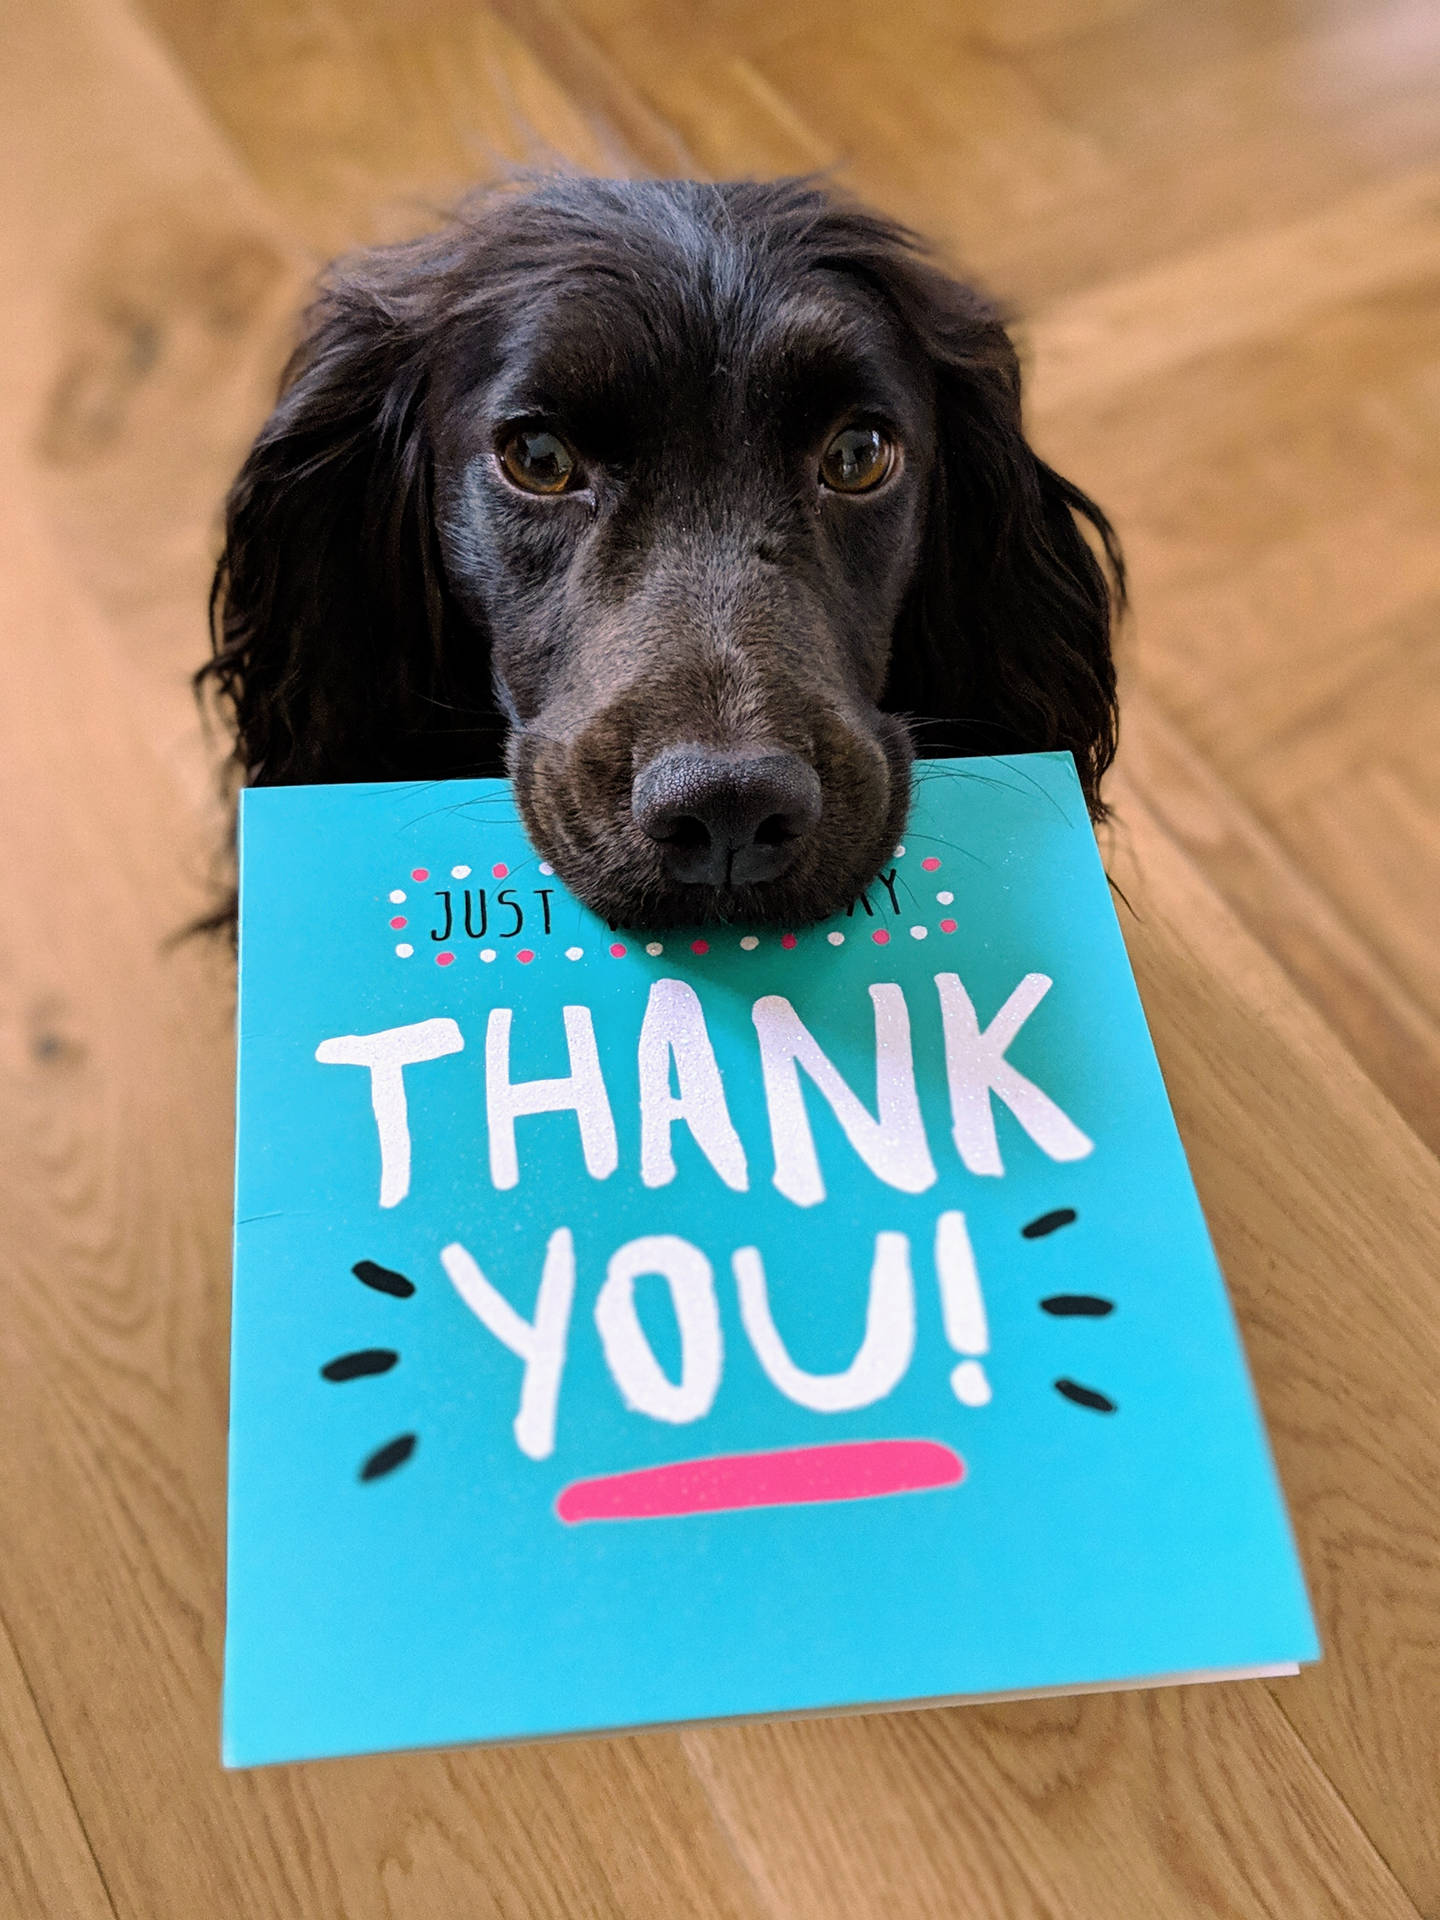 Adorable dog with Thank You card mobile wallpaper.